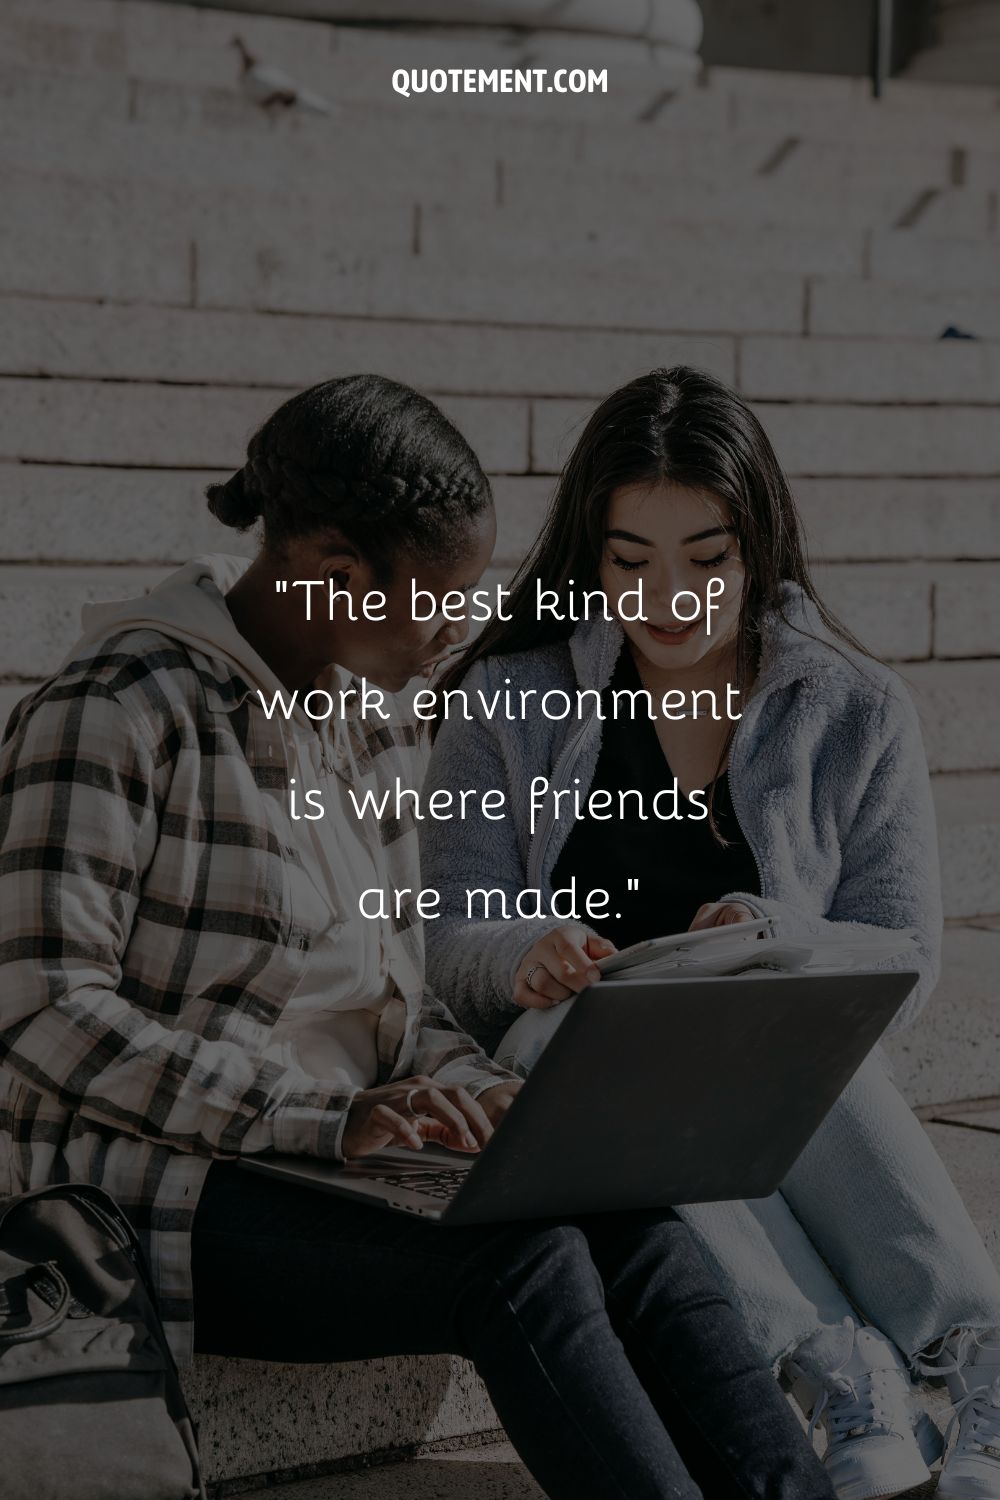 two girls working on a laptop representing work bestie quote